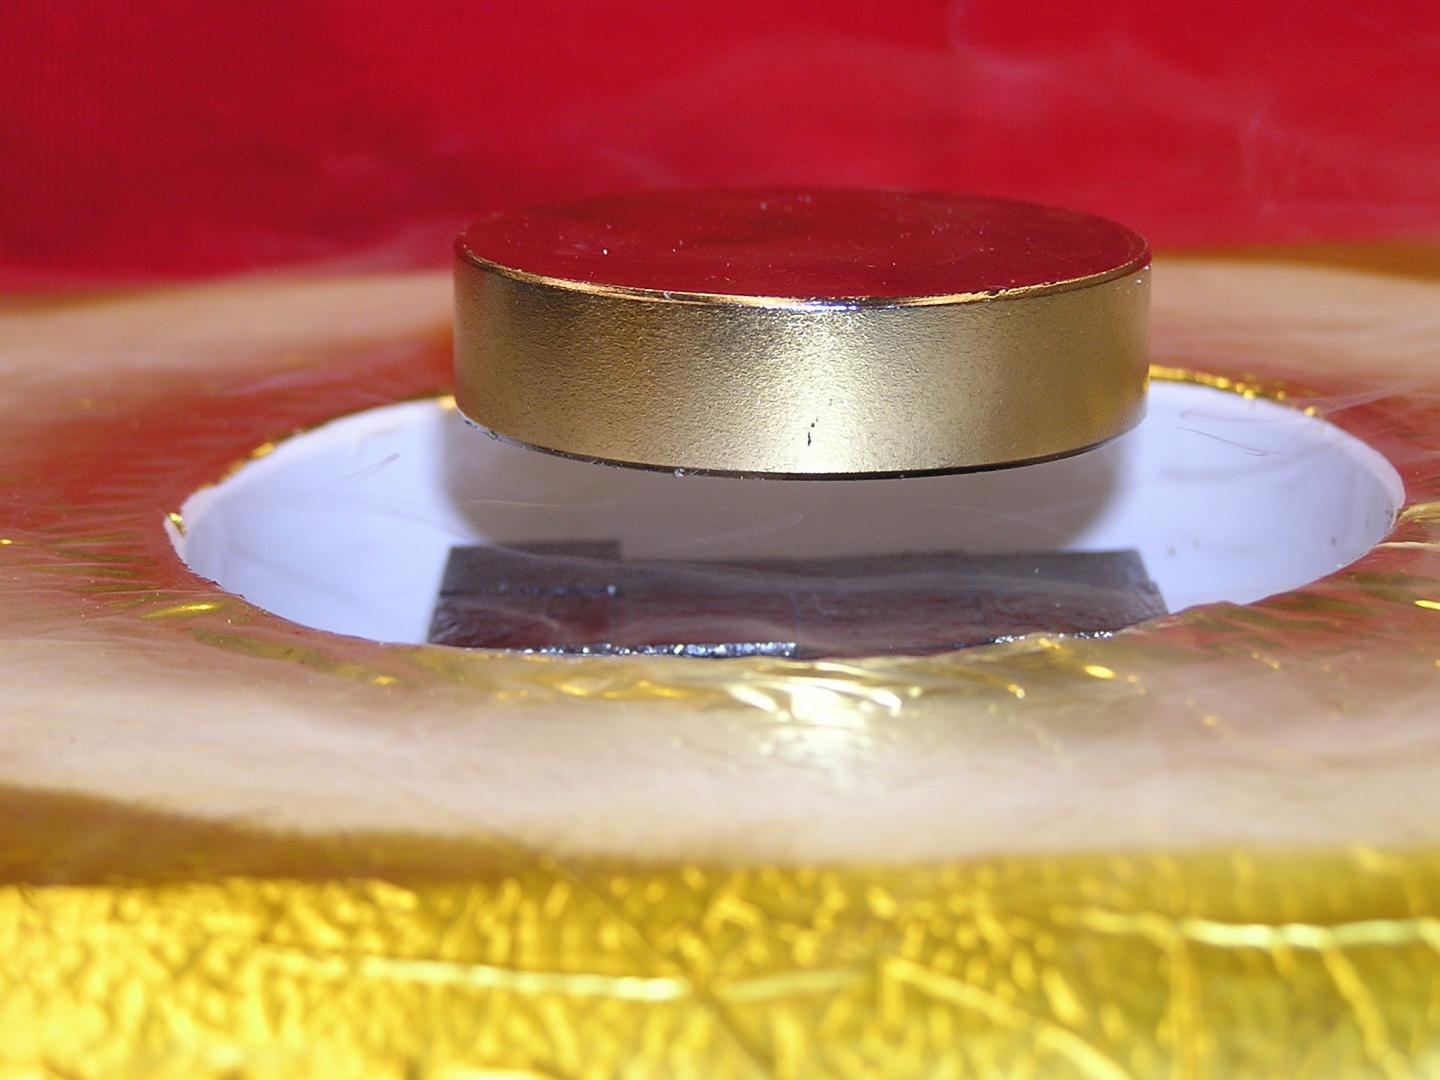 Magnet Levitated Over a High-Temperature Superconductor